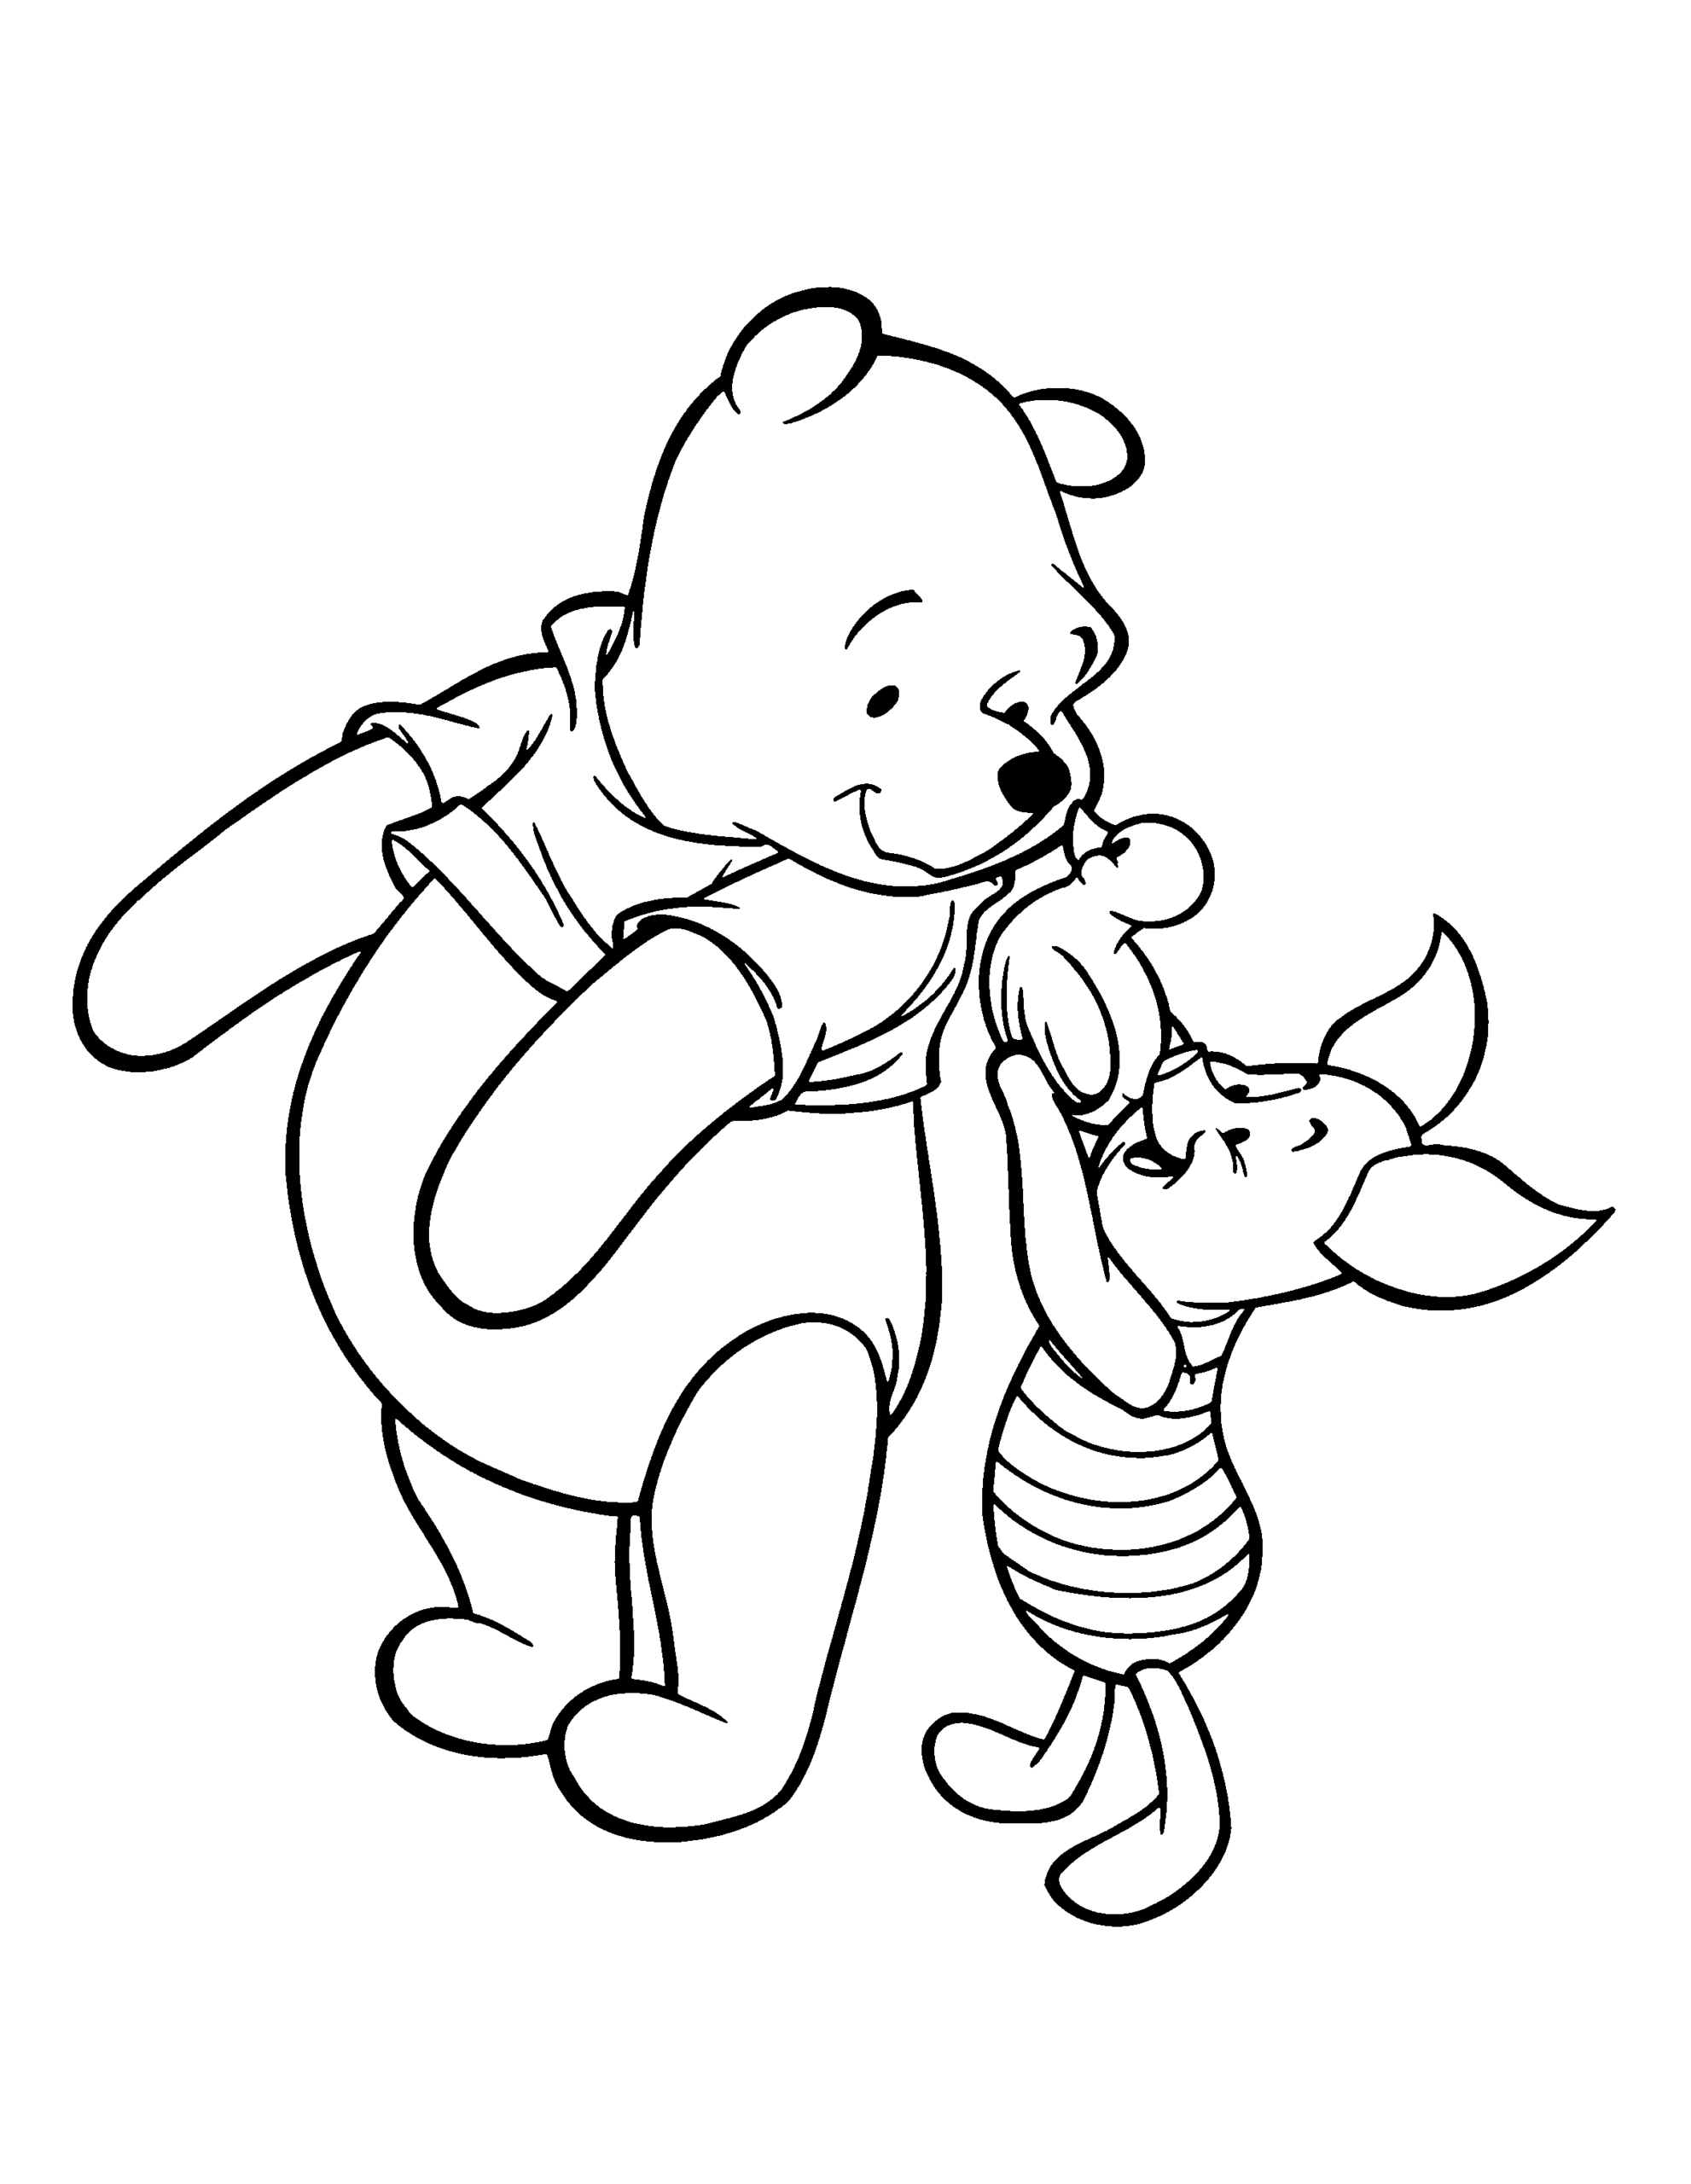 Winnie the Pooh Coloring Pages Cartoons winnie the pooh 104 Printable 2020 7083 Coloring4free